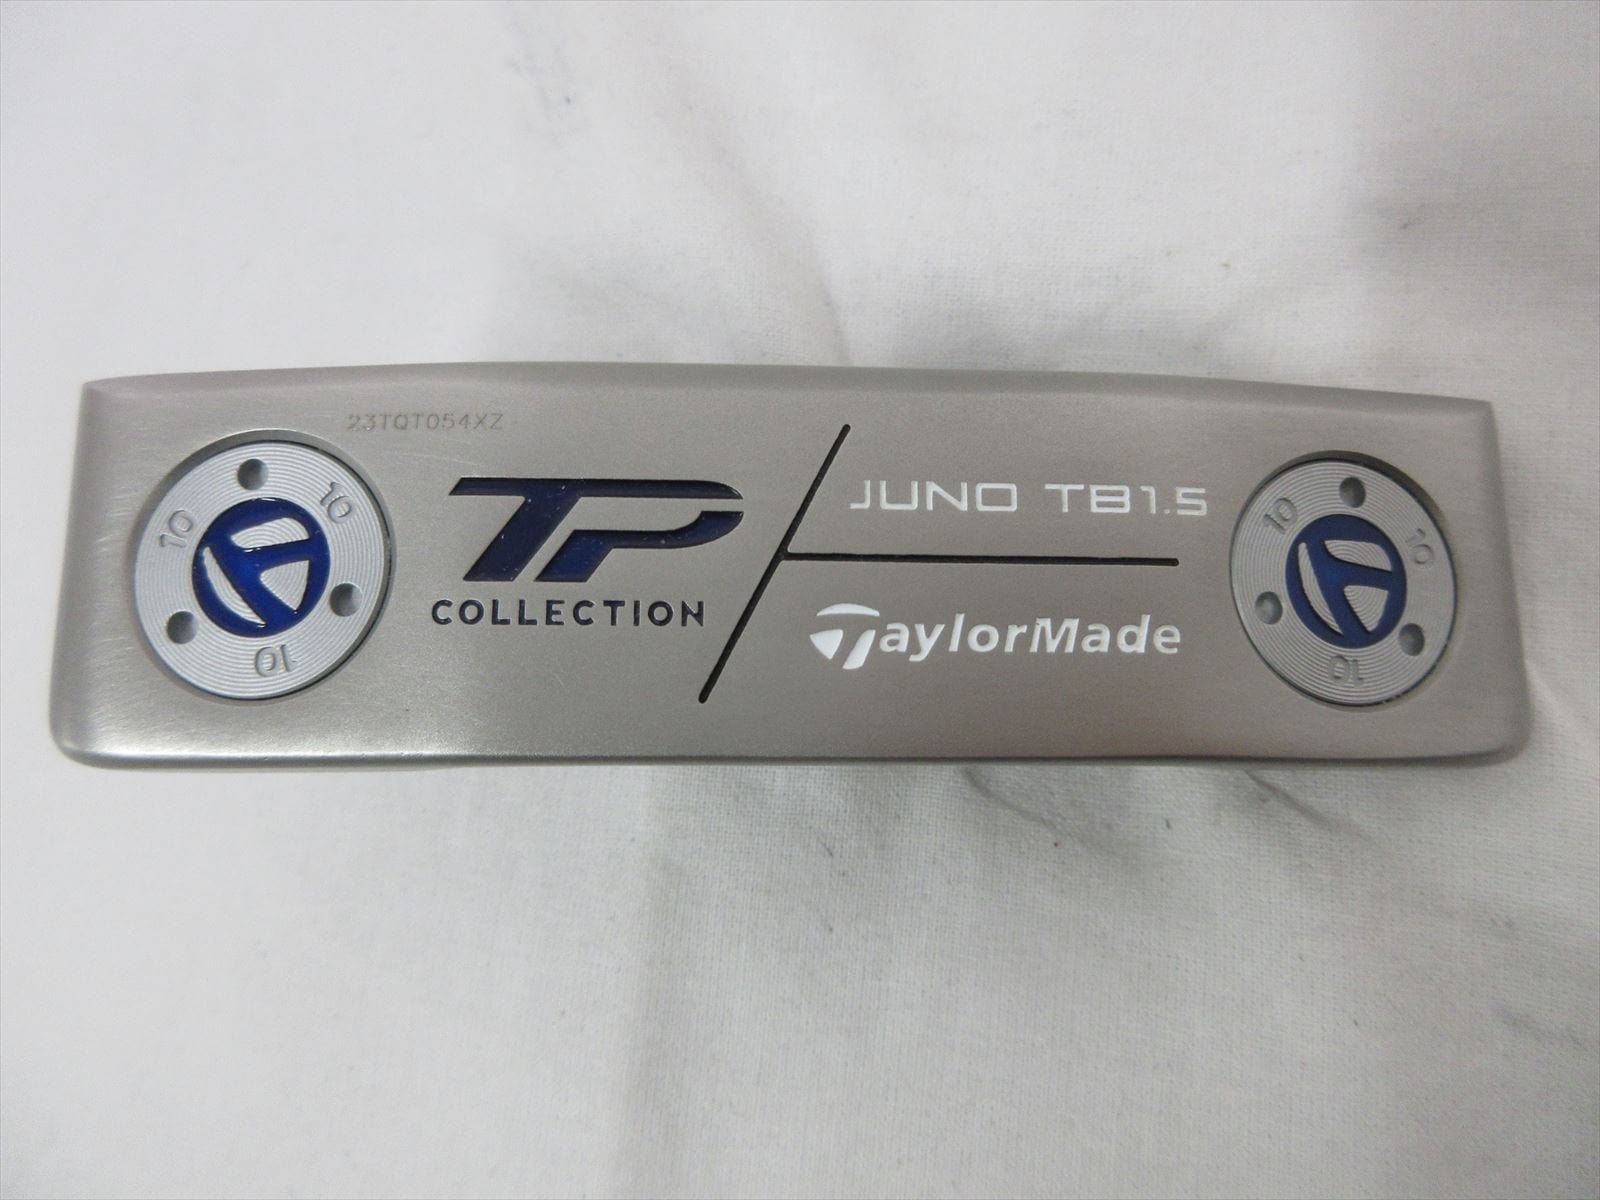 TaylorMade Putter TP COLLECTION HYDRO BLAST JUNO TB1.5 – GOLF